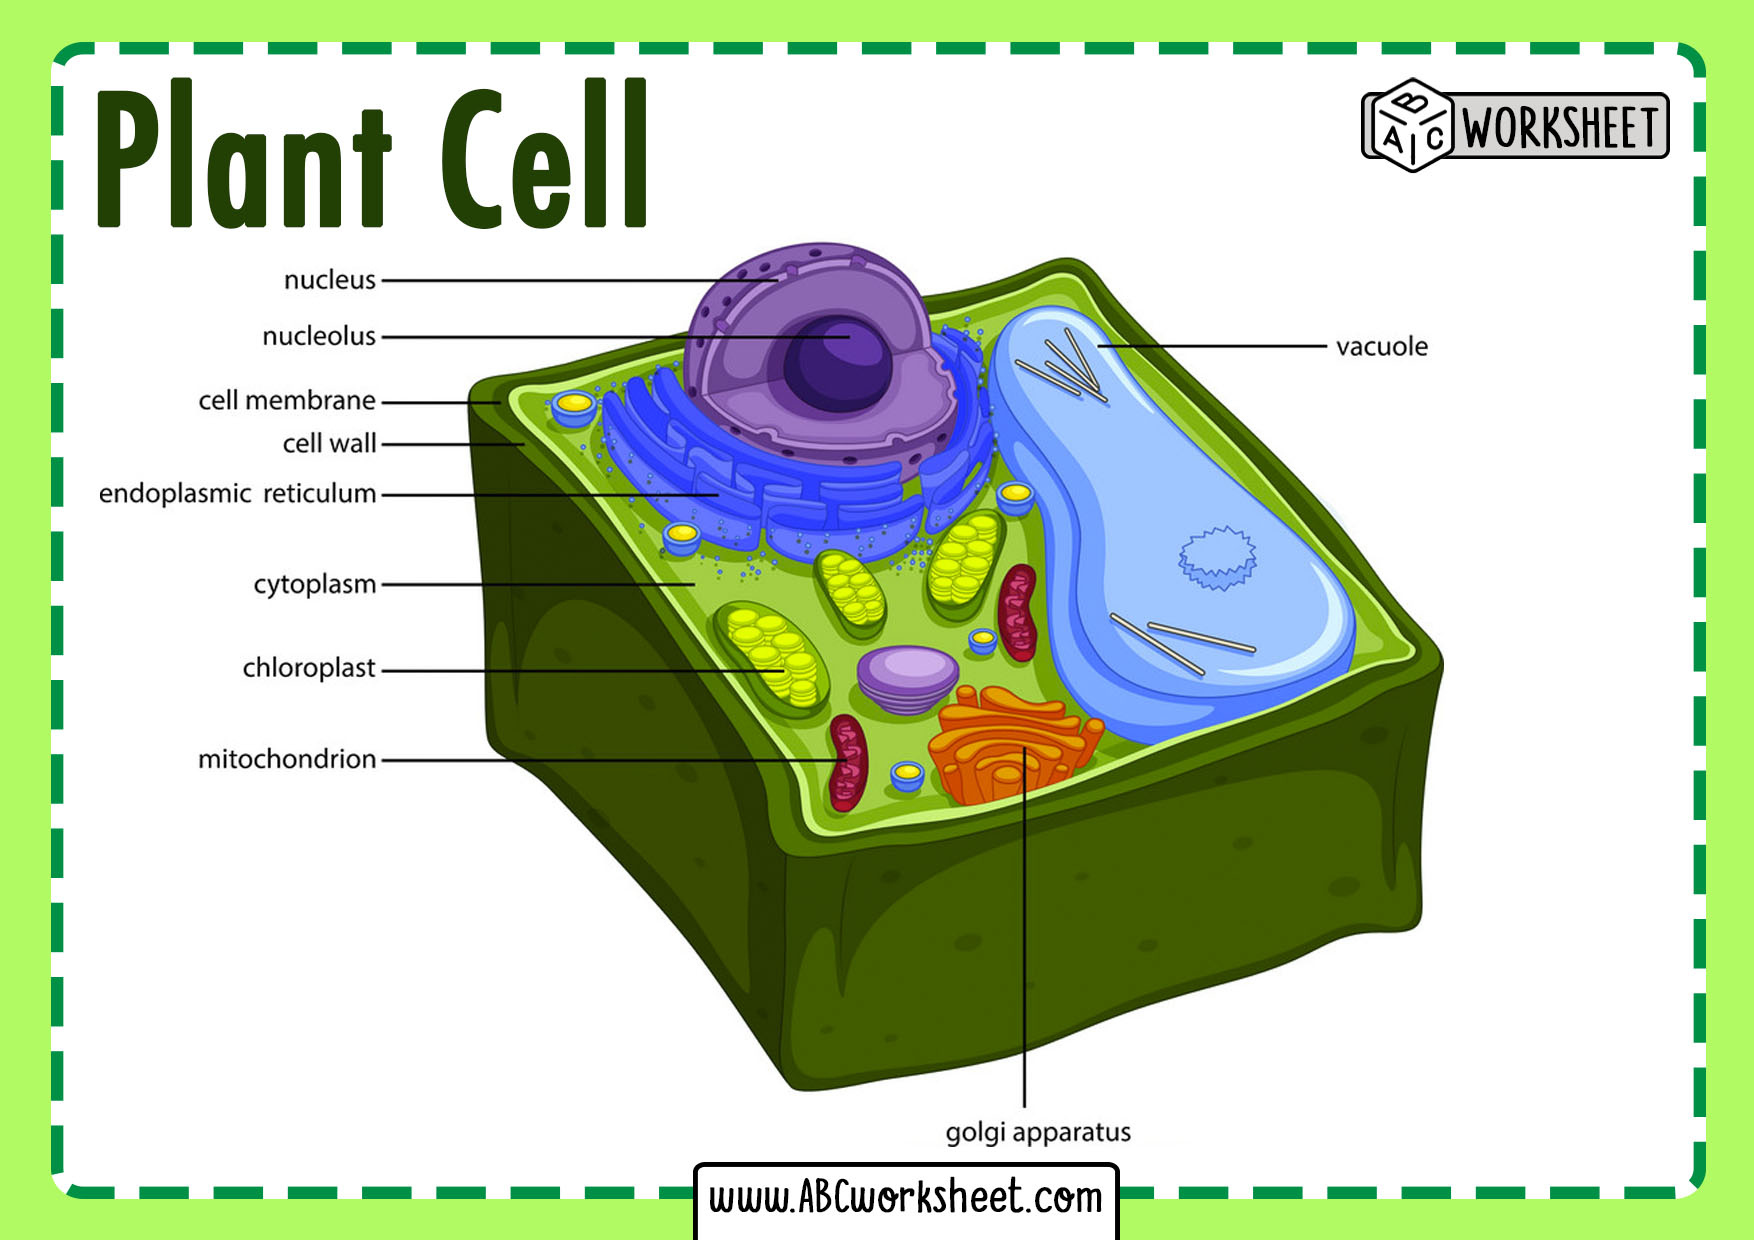 Plant Cell Labeled - ABC Worksheet